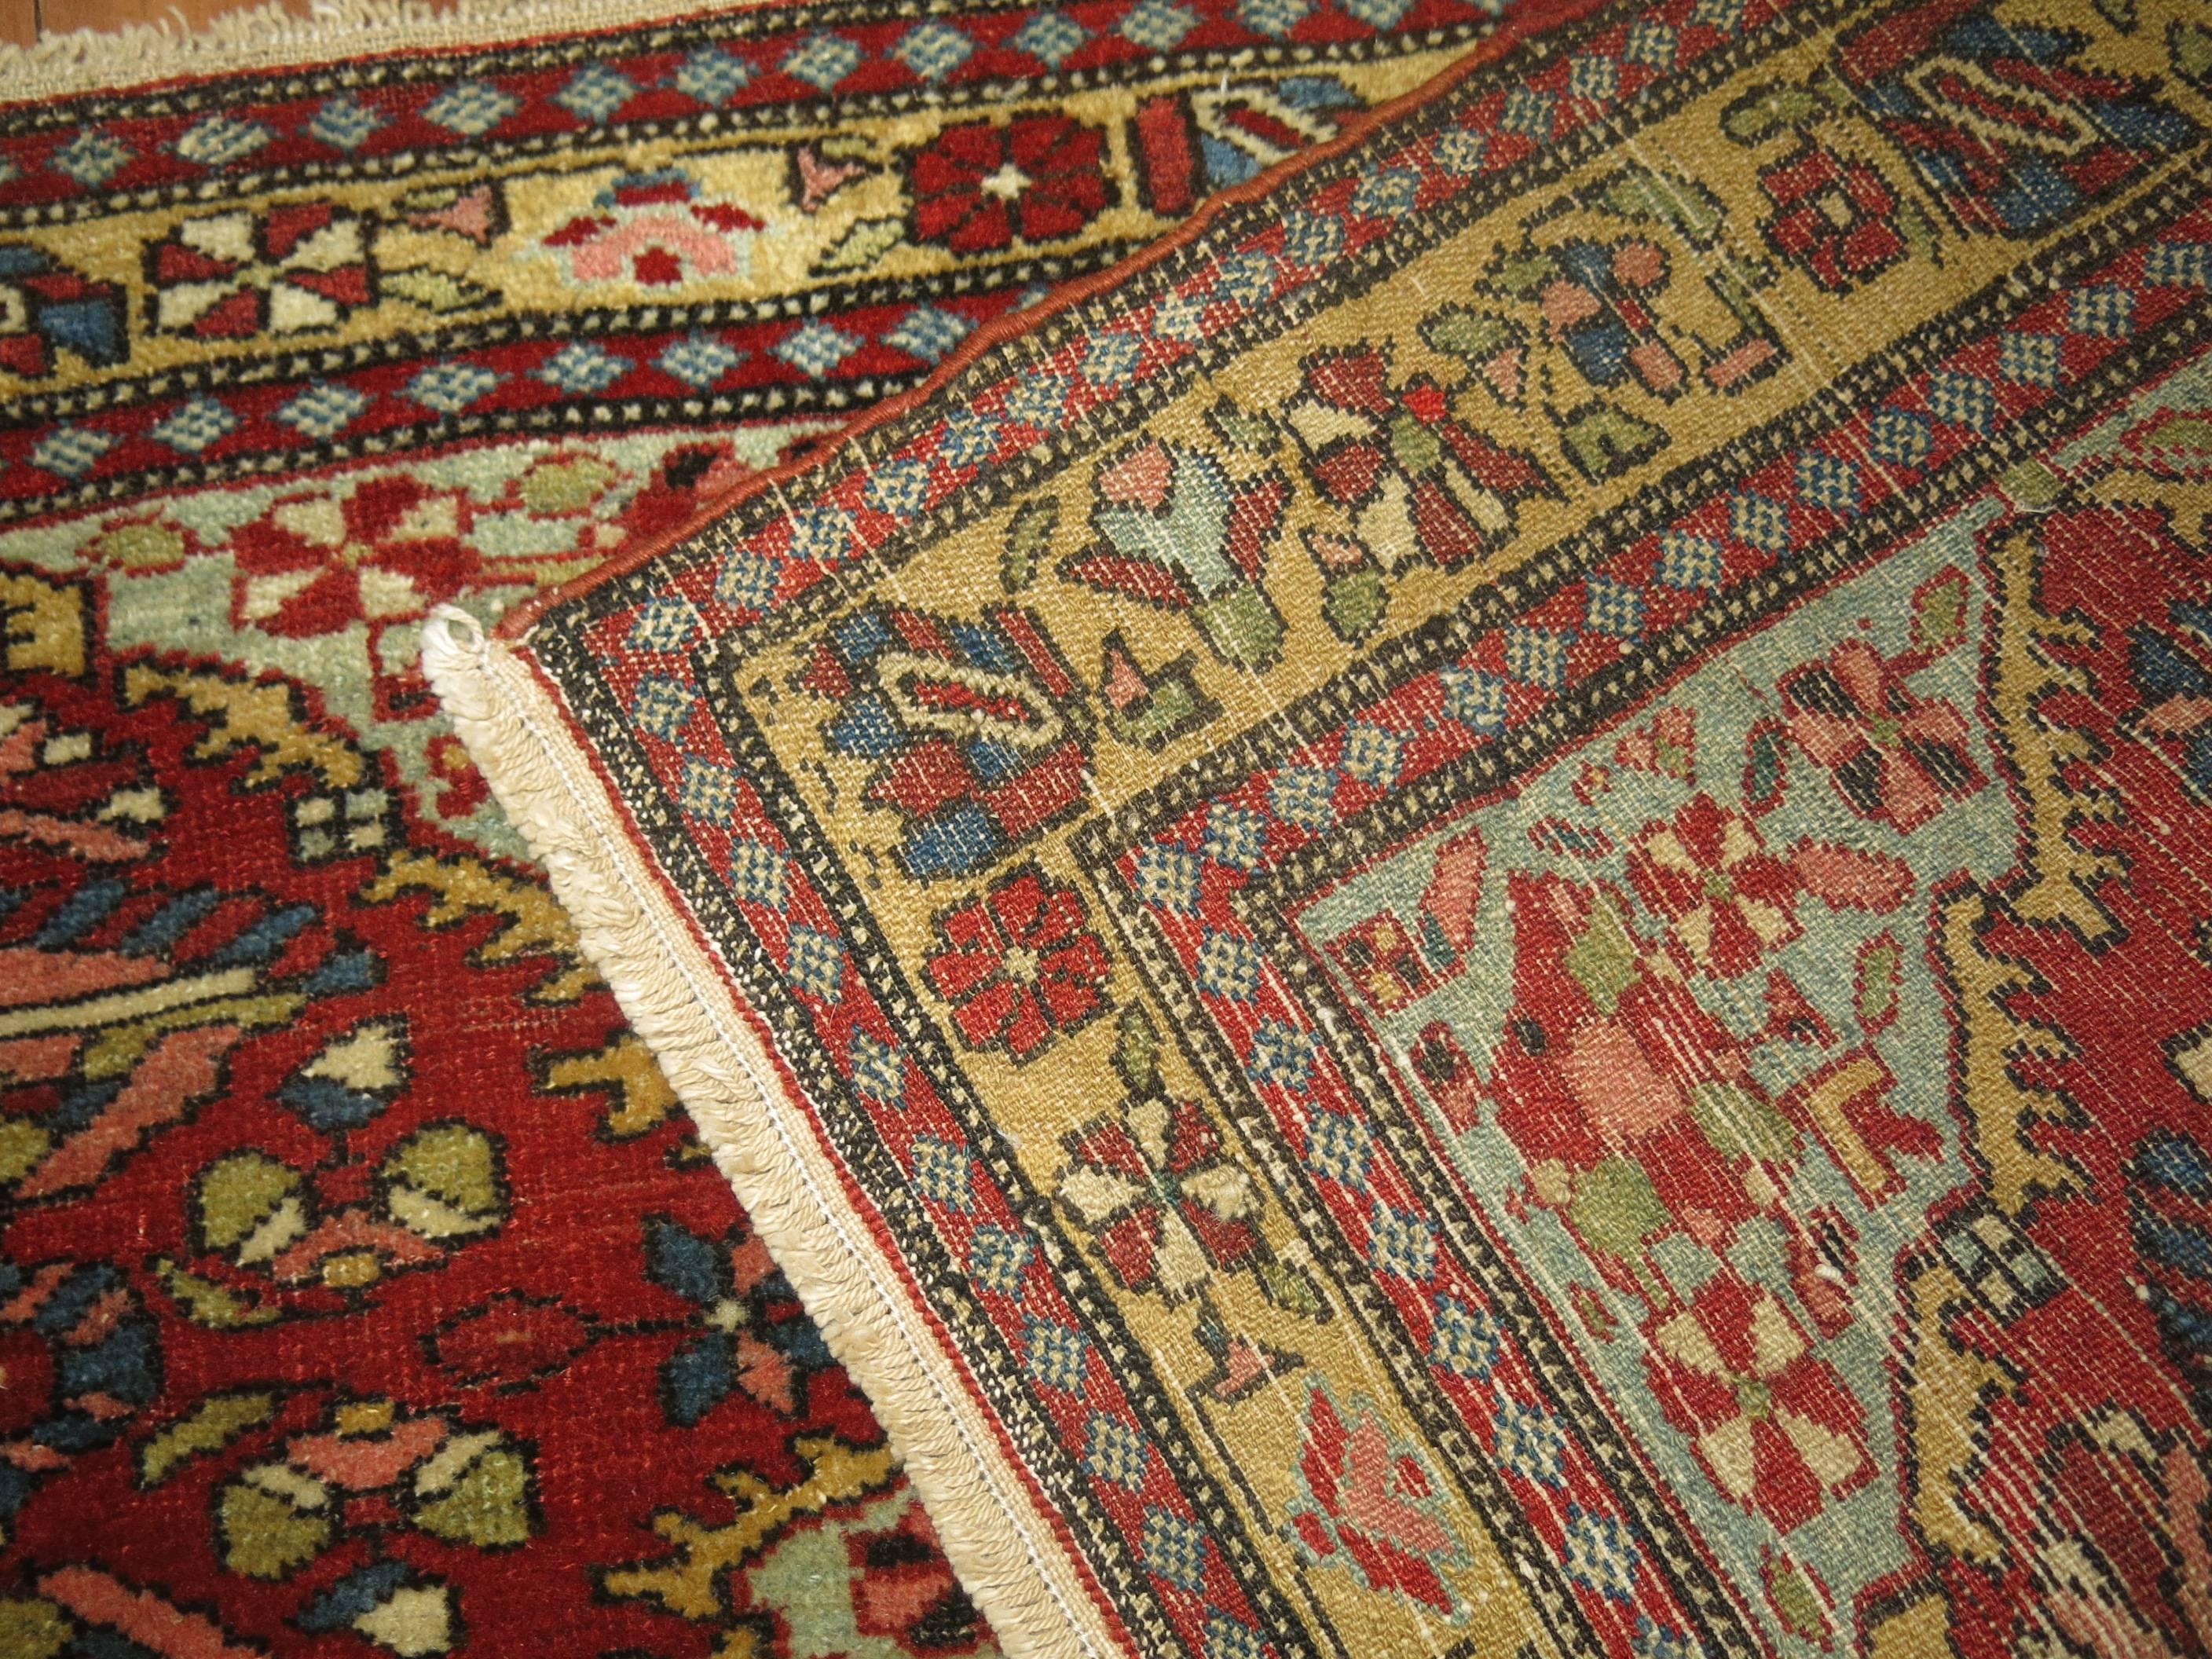 Hand-Woven Jewel Tone Fine Quality Antique Persian Malayer Narrow Horizontal Woven Rug For Sale